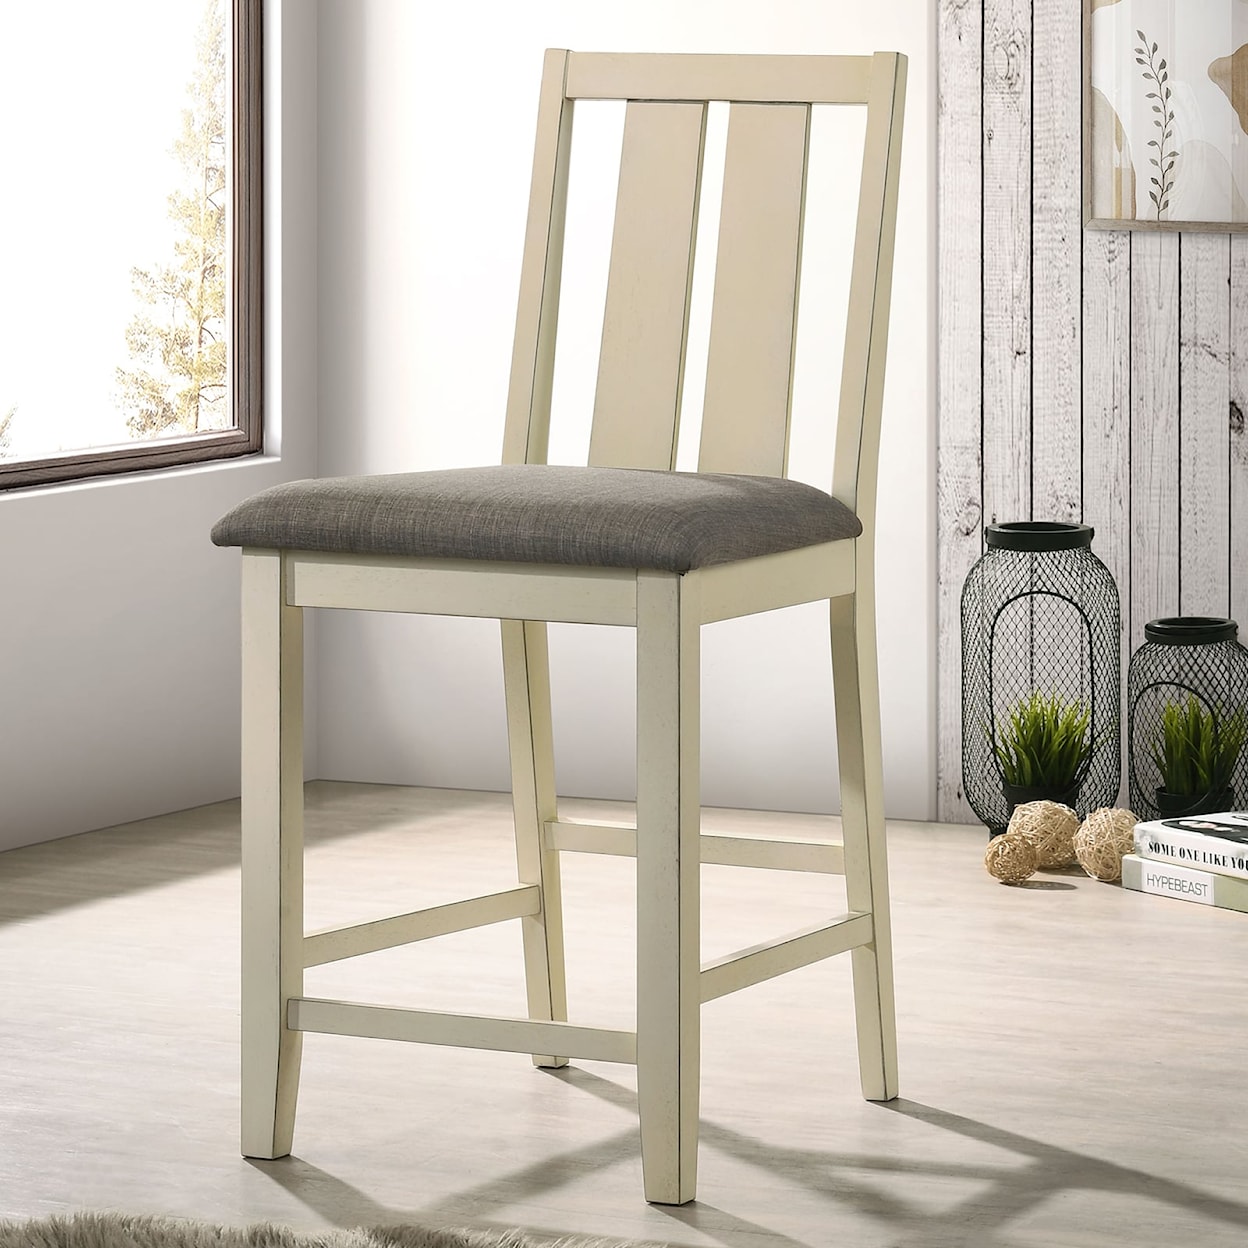 Furniture of America WILSONVILLE Upholstered Counter-Height Dining Chair